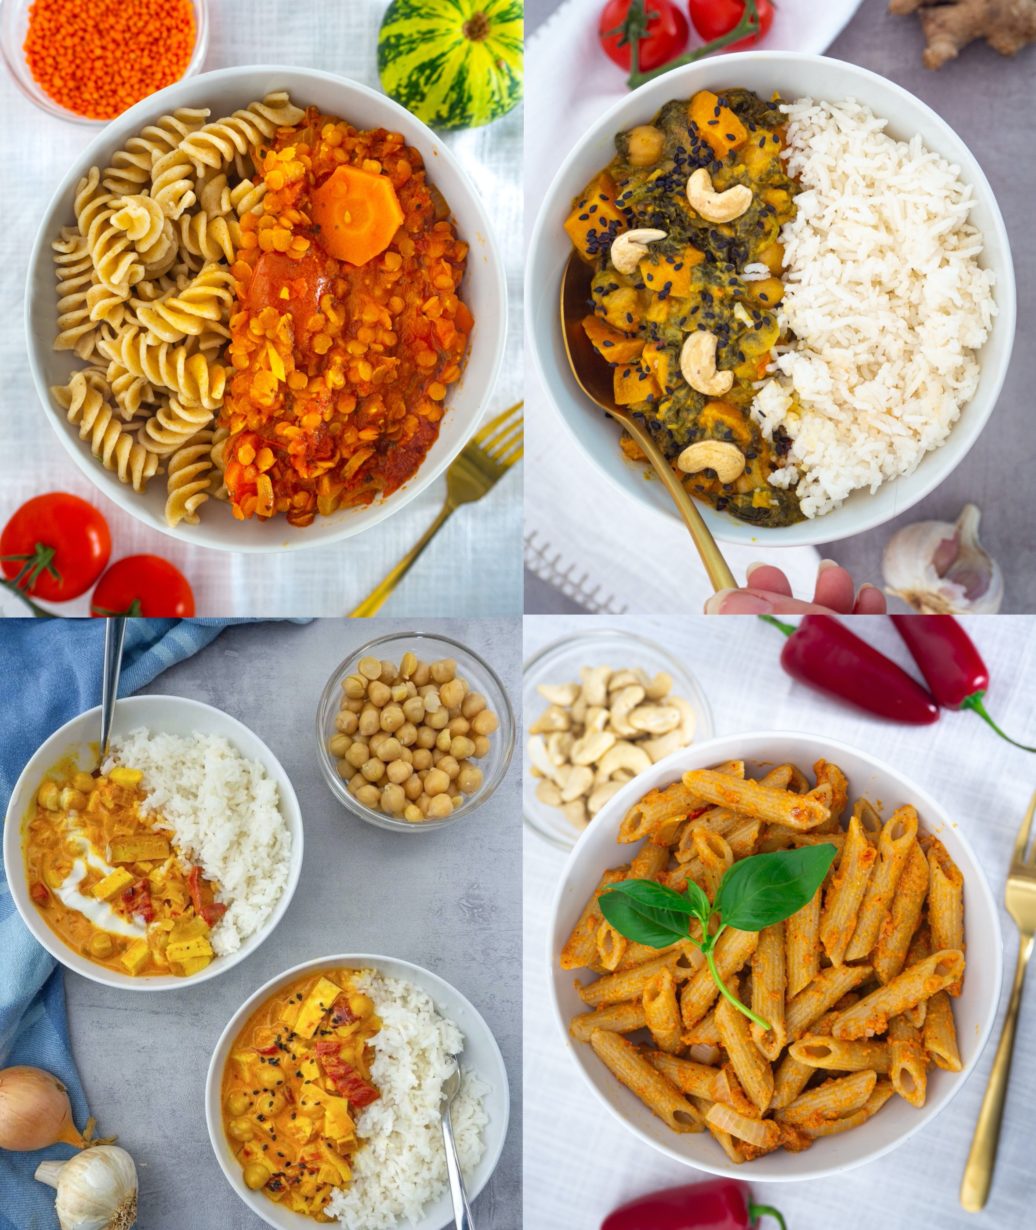 15 easy plant-based meals